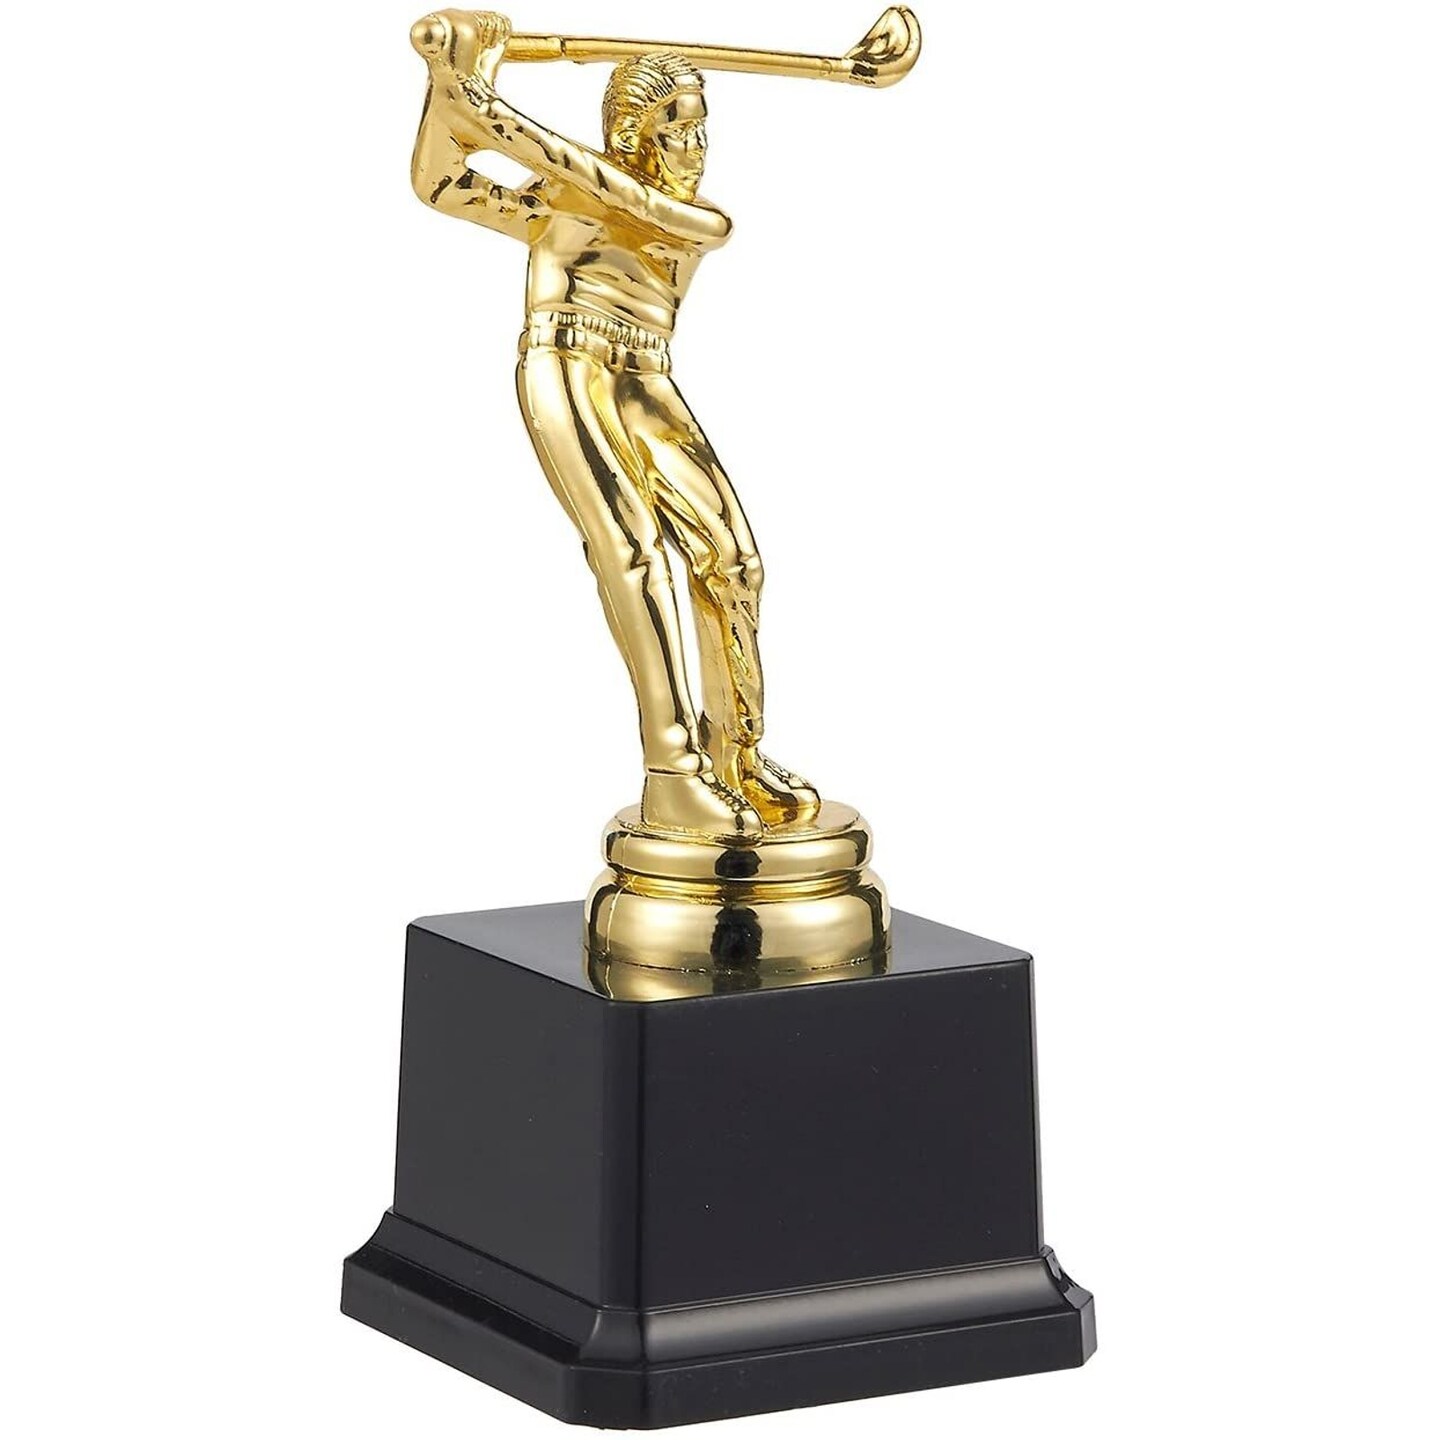 Golf Trophy, Gold Champion Trophy for Golf Tournaments, Competitions, Parties (3 x 3 x 7 In)